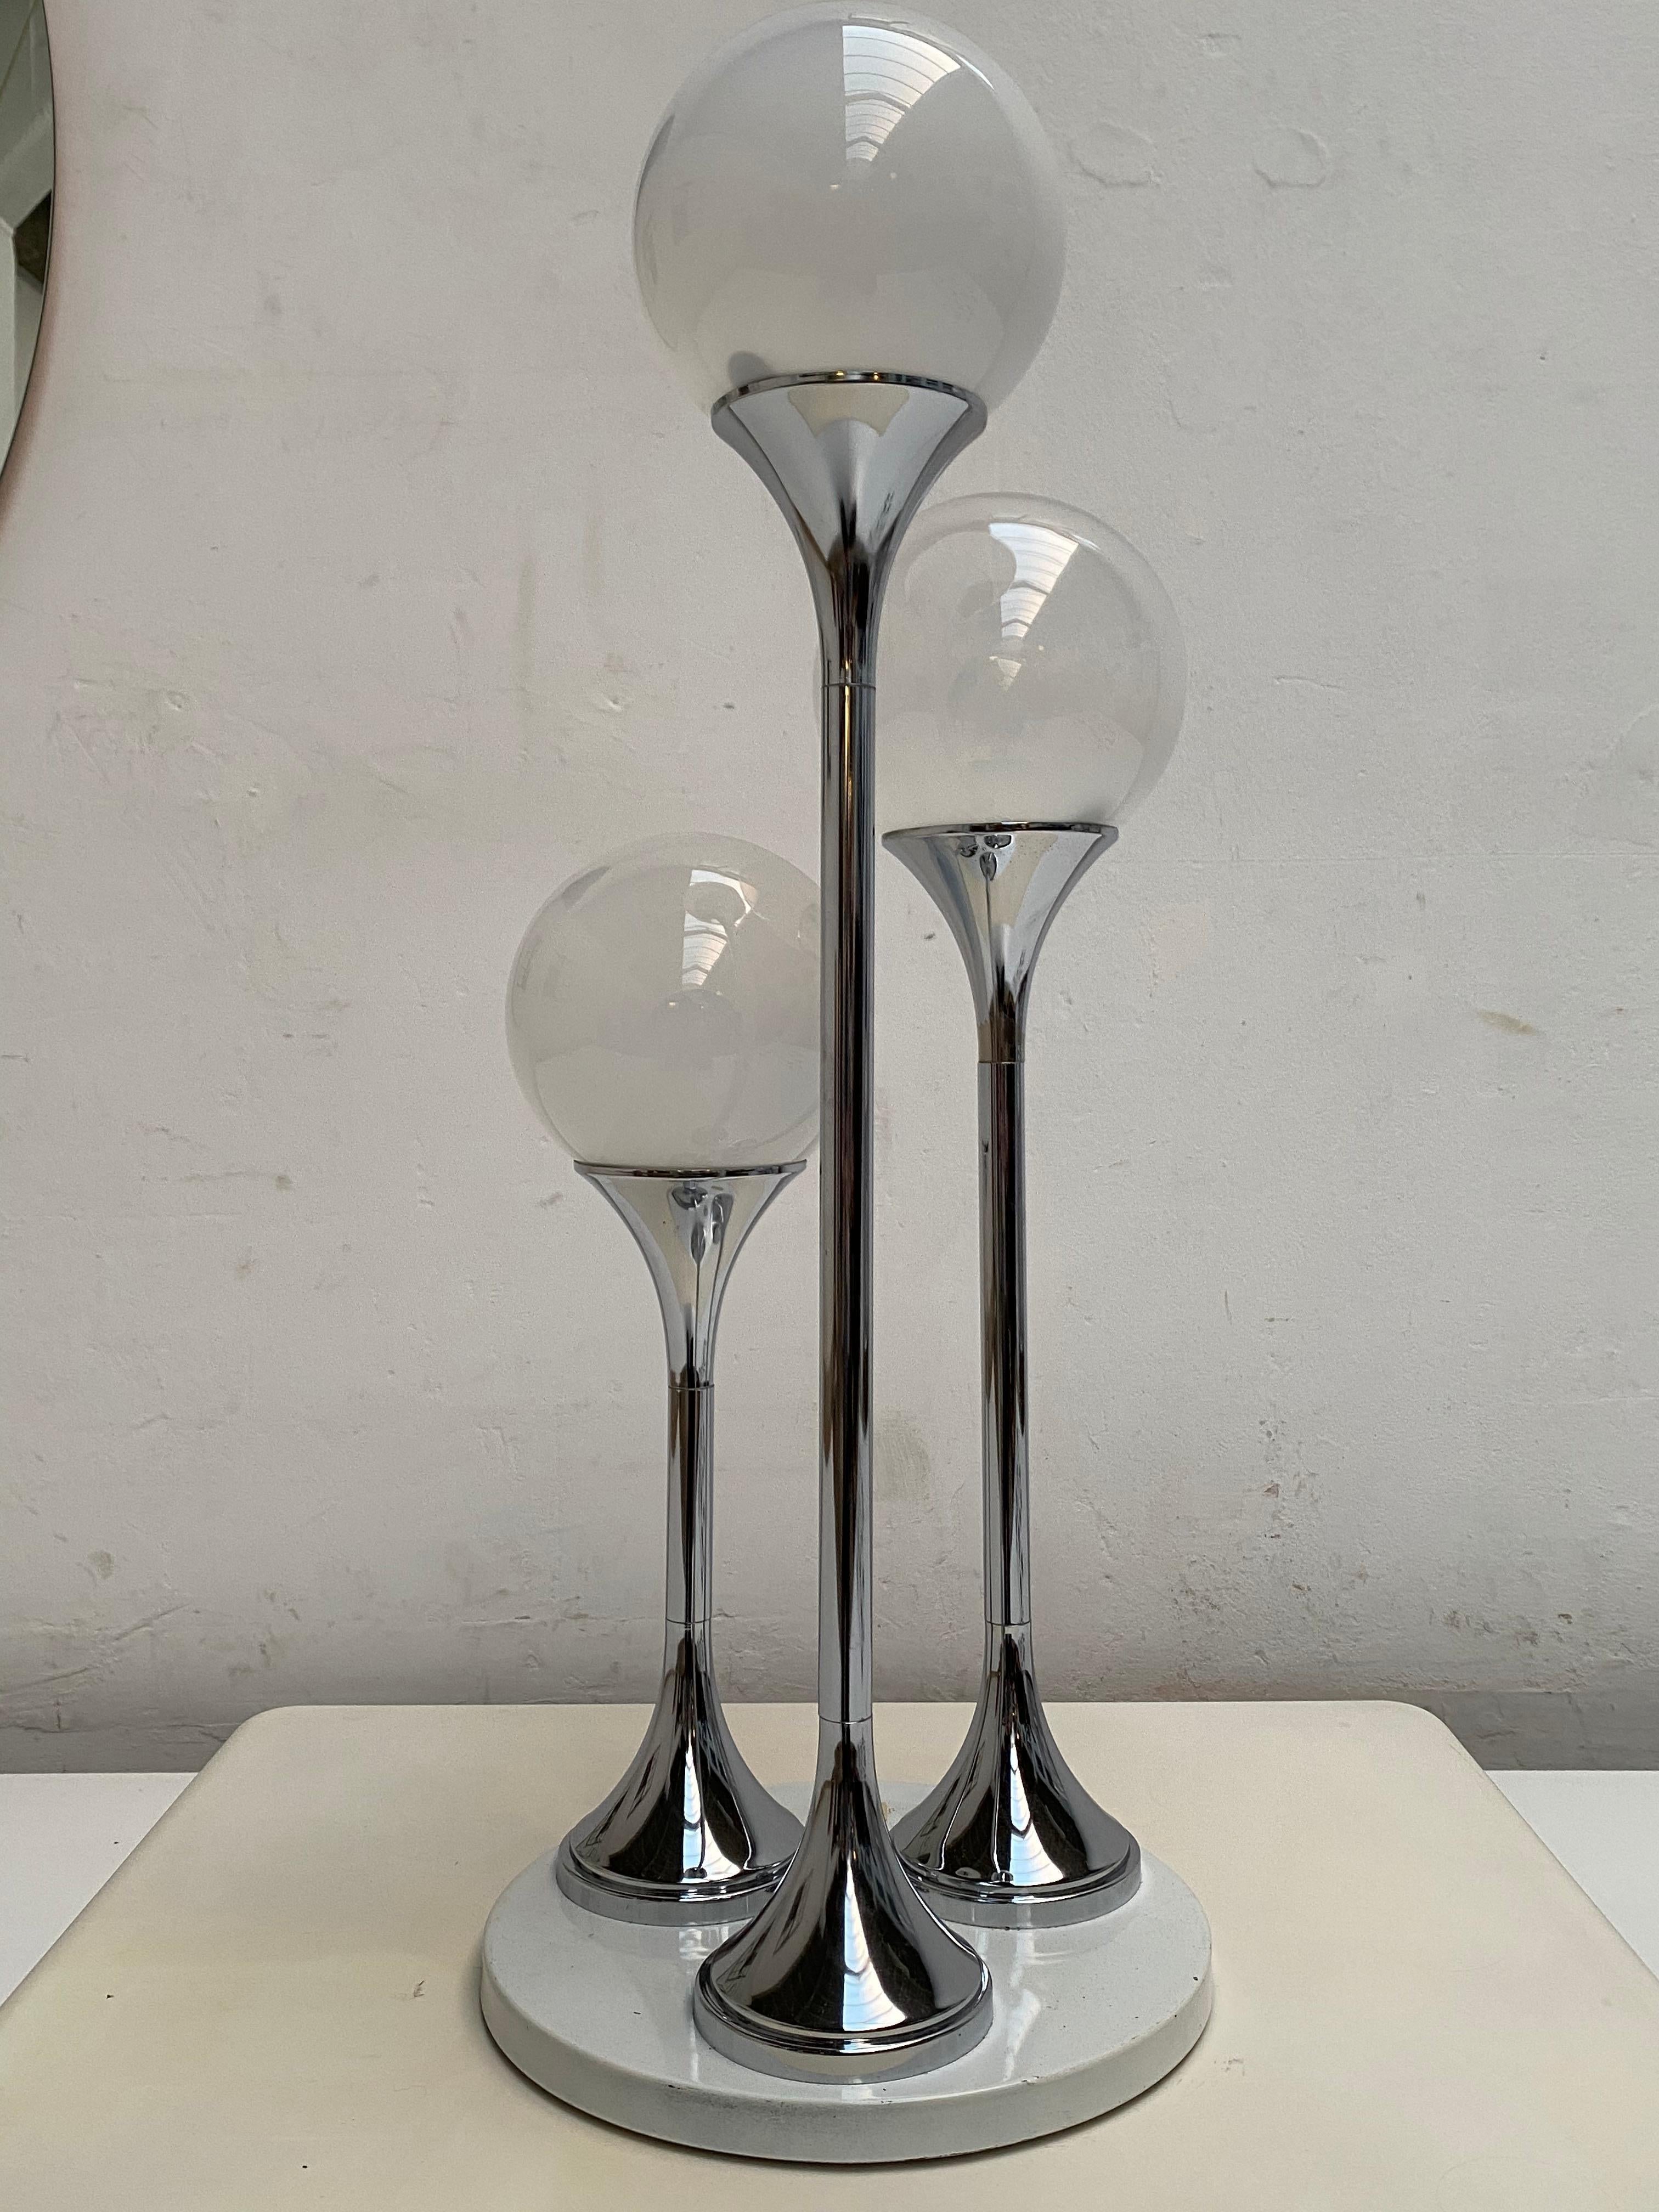 Wonderful large Space Age table lamp by Targetti Sankey, Italy, 1970s.

3 milk to clear glass spheres on 3 chromed stems on a white lacquered round metal base

Perfect for a Space Age inspired Interior.



   